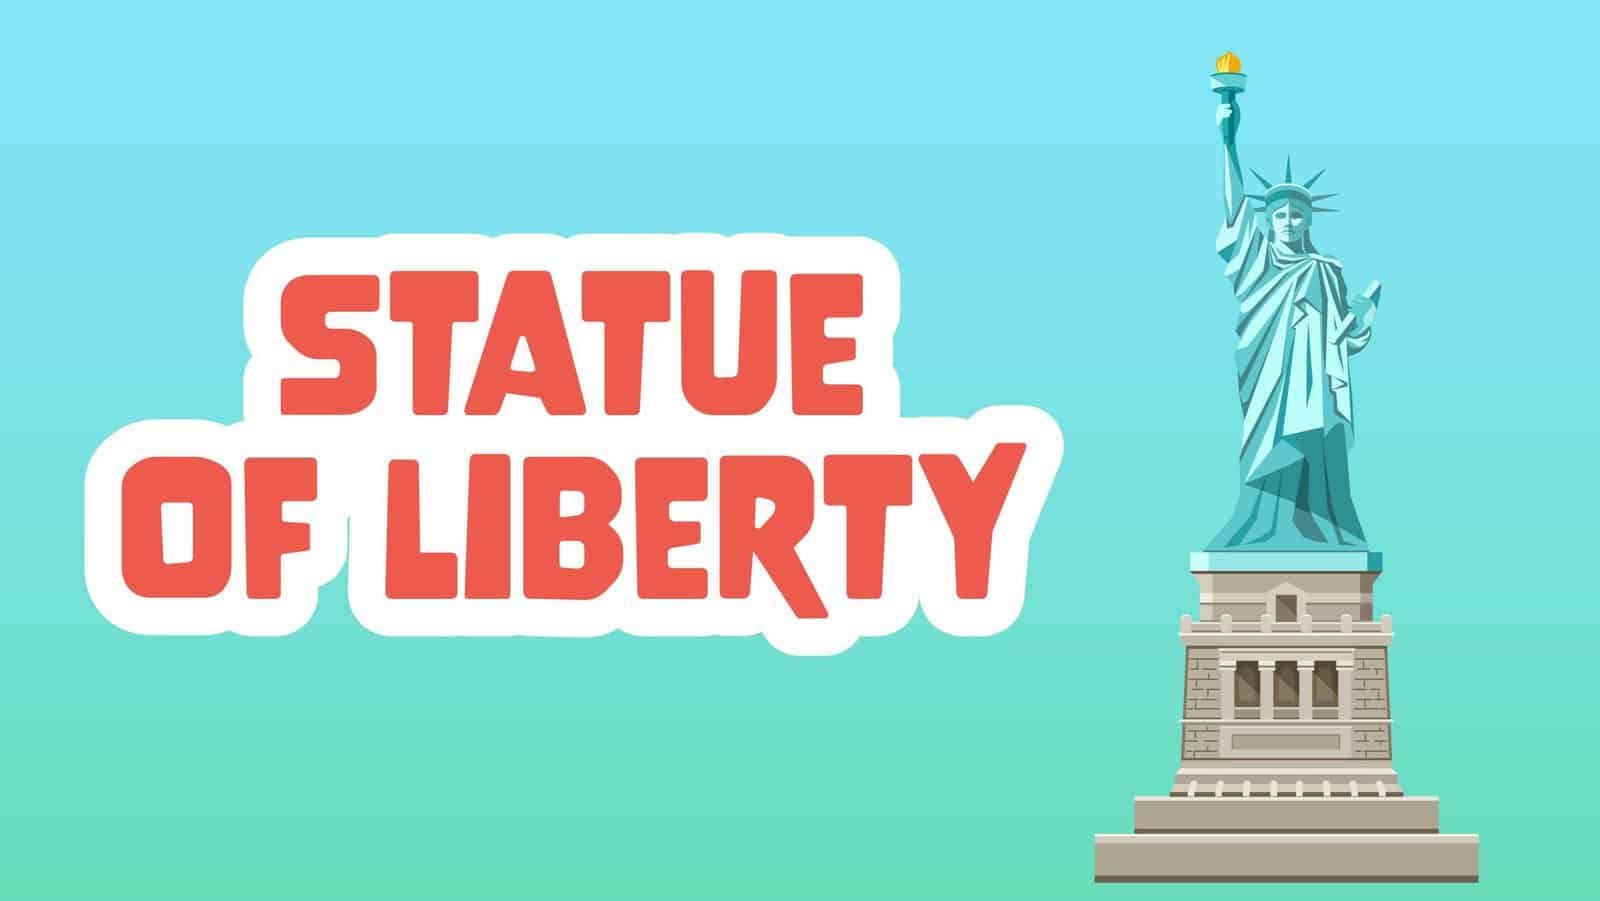 Statue of Liberty Facts for Kids – 5 Great Facts about the Statue of Liberty